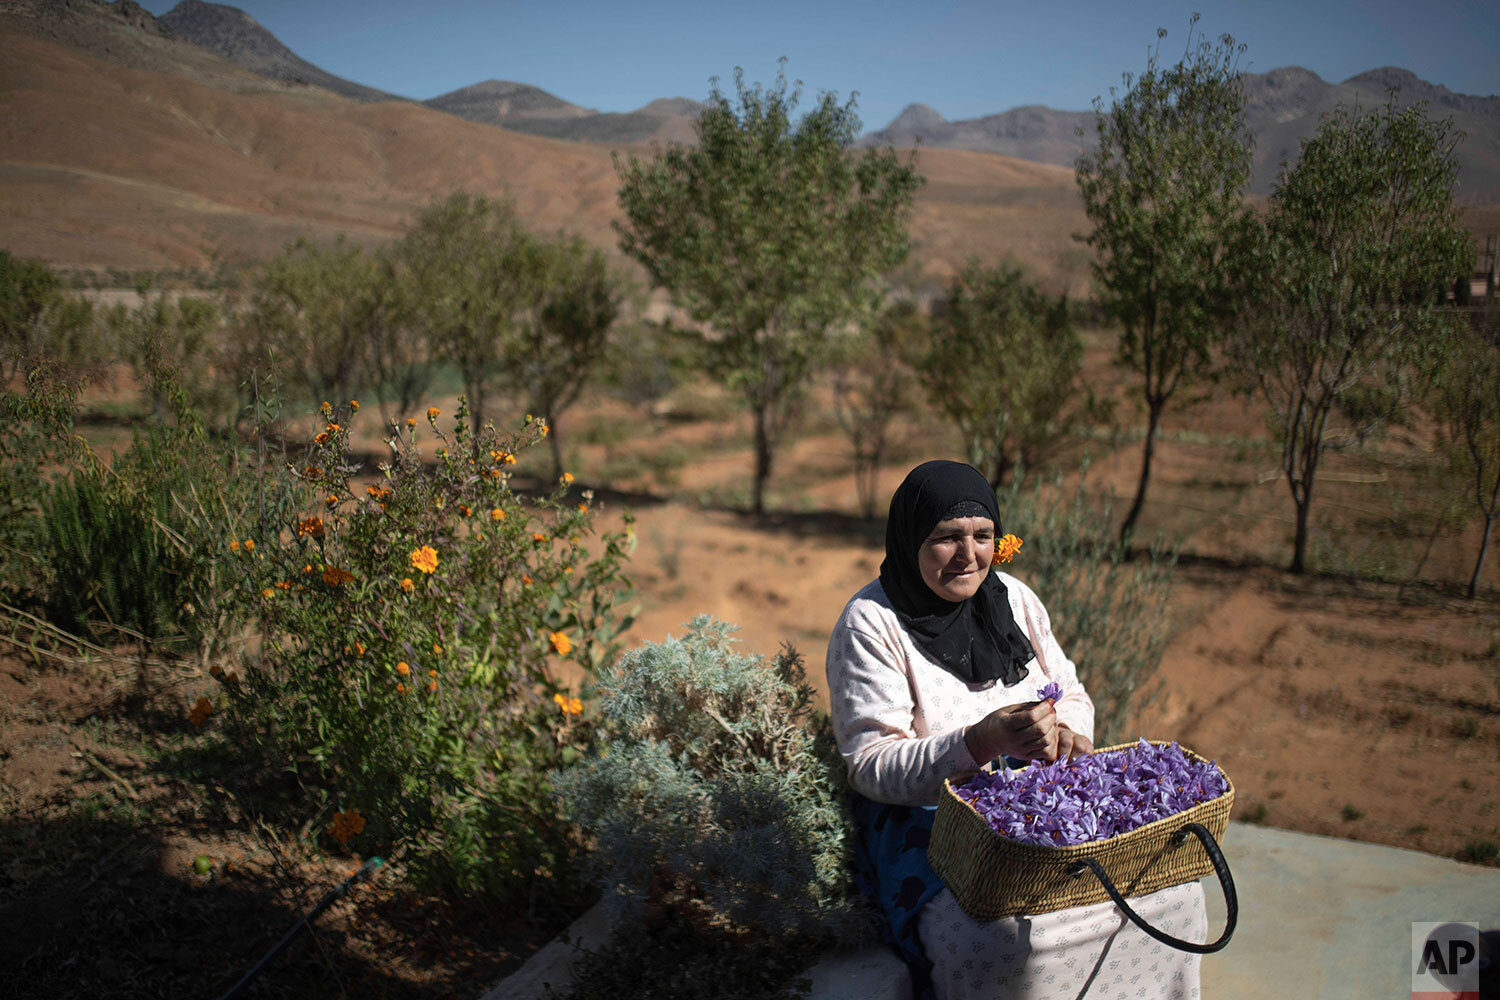  In this Tuesday, Nov. 5, 2019 photo, Fatima Aït Tahadousht, 50, displays a basket of freshly collected Saffron flowers during harvest season in Askaoun, a small village near Taliouine, in Morocco's Middle Atlas Mountains. The saffron plants bloom fo